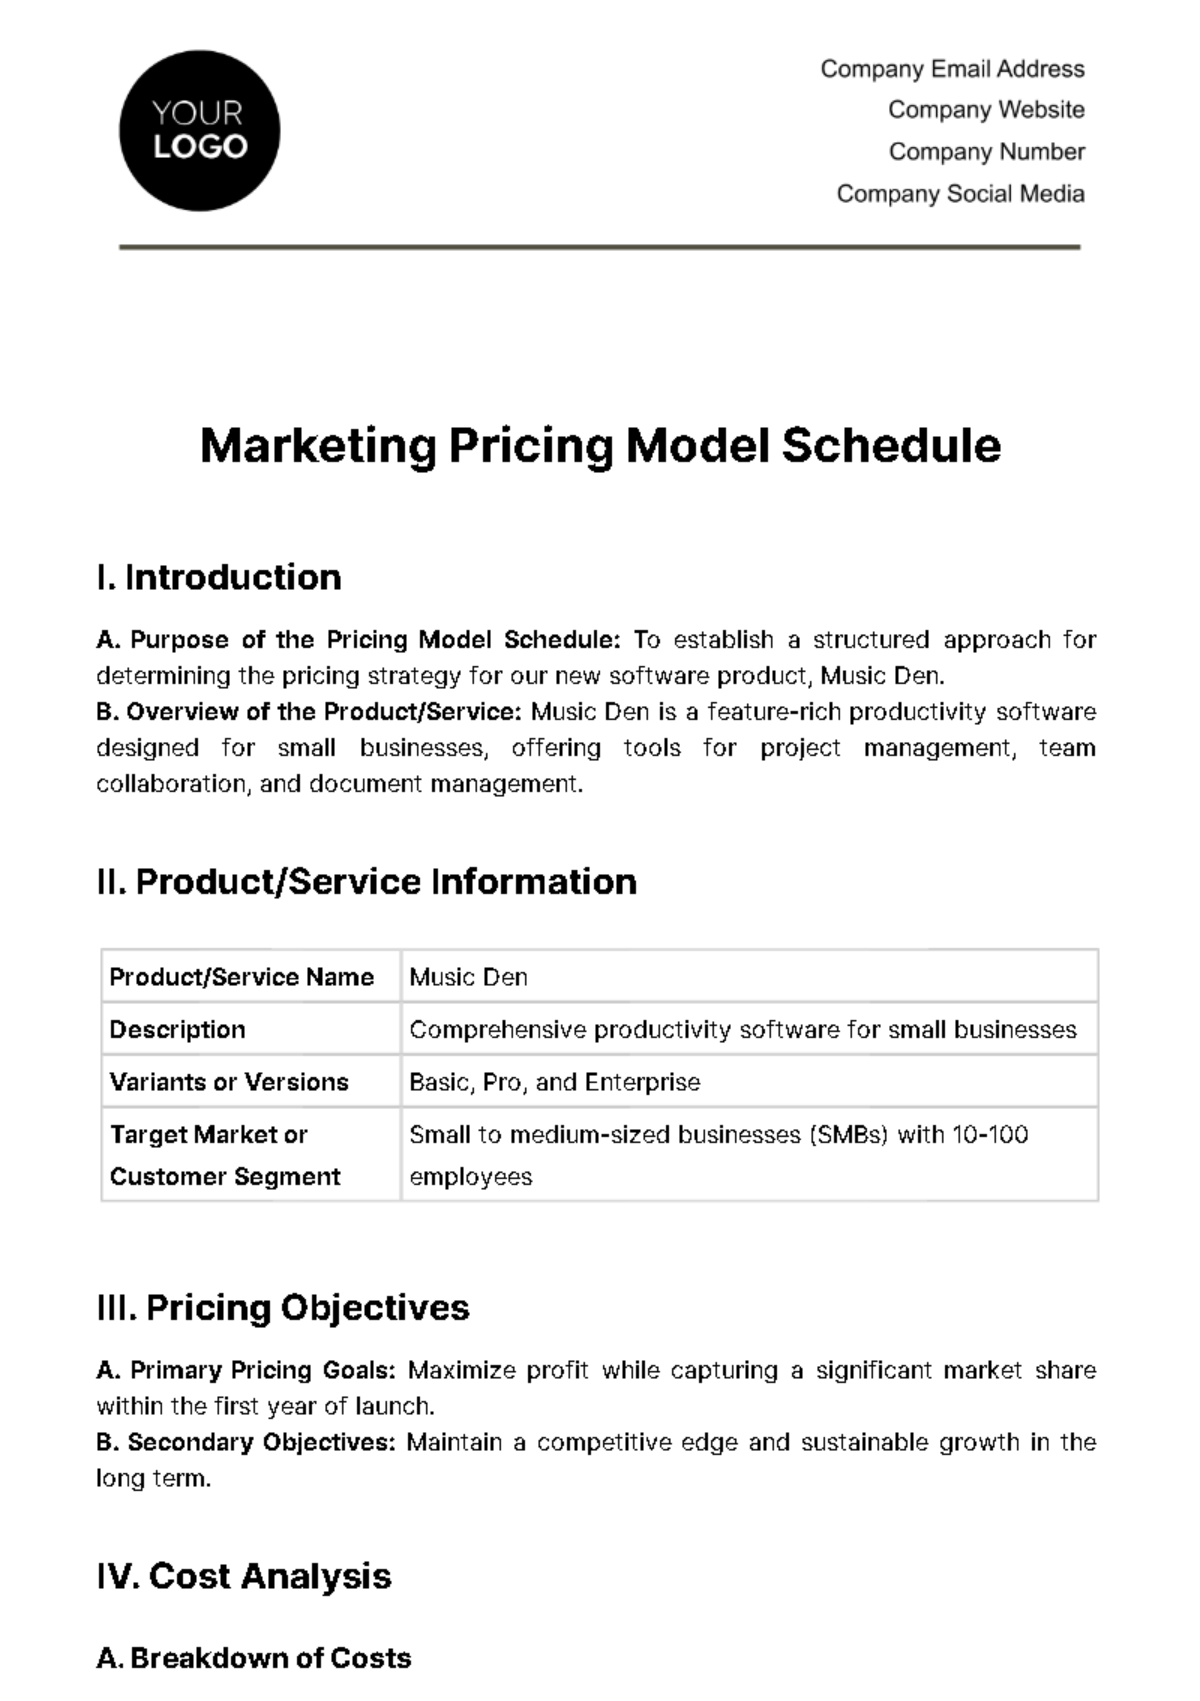 Free Marketing Pricing Model Schedule Template